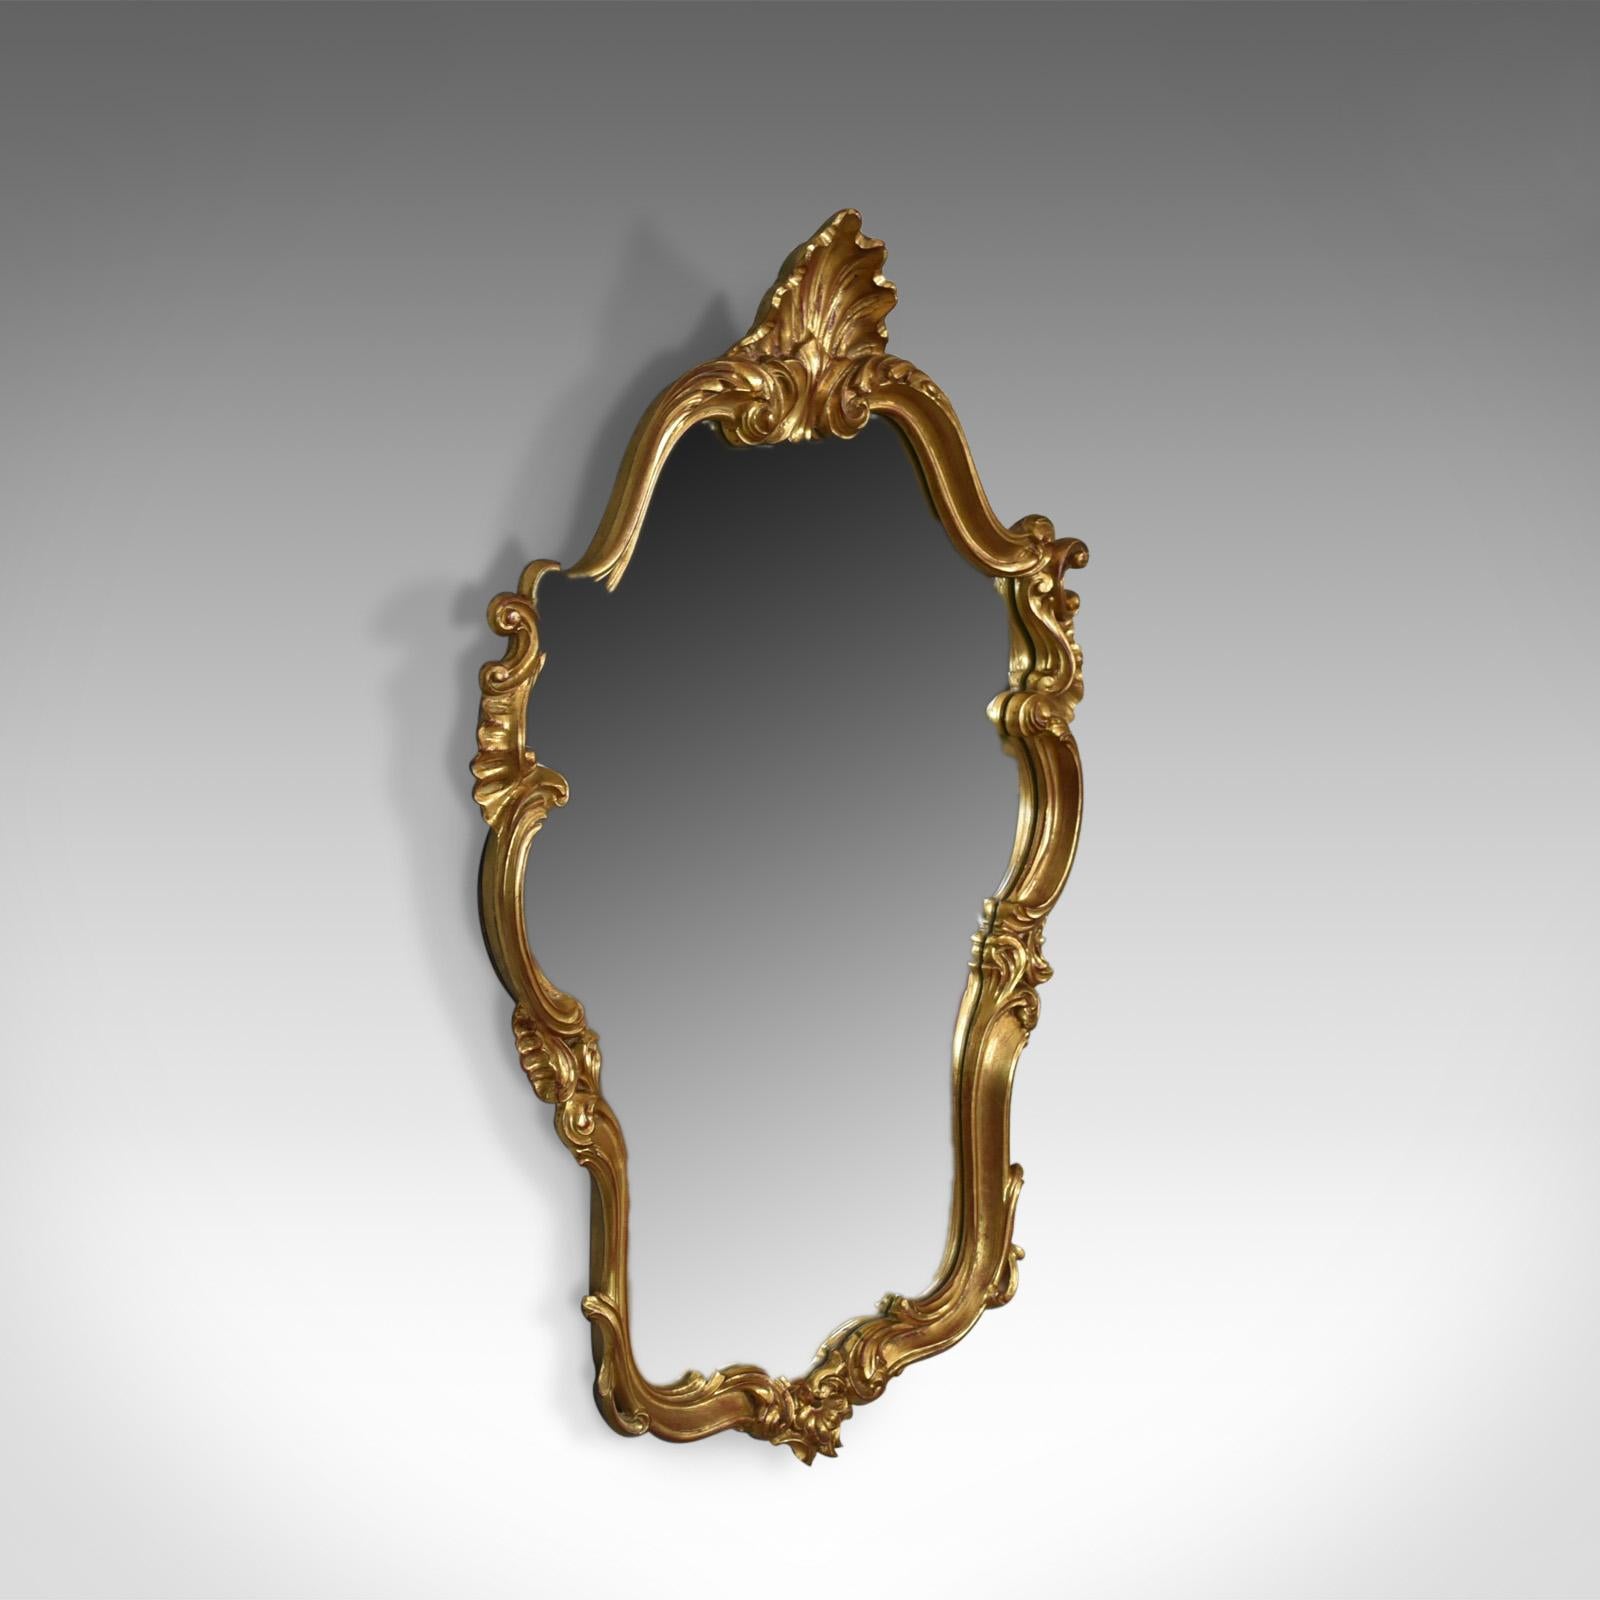 This is a vintage wall mirror in the Victorian Rococo Revival manner, English dating to the latter part of the 20th century.

Typically elaborate and elegant design
Giltwood frame featuring scrolls, leaves and embellishment
Quality shaped mirror